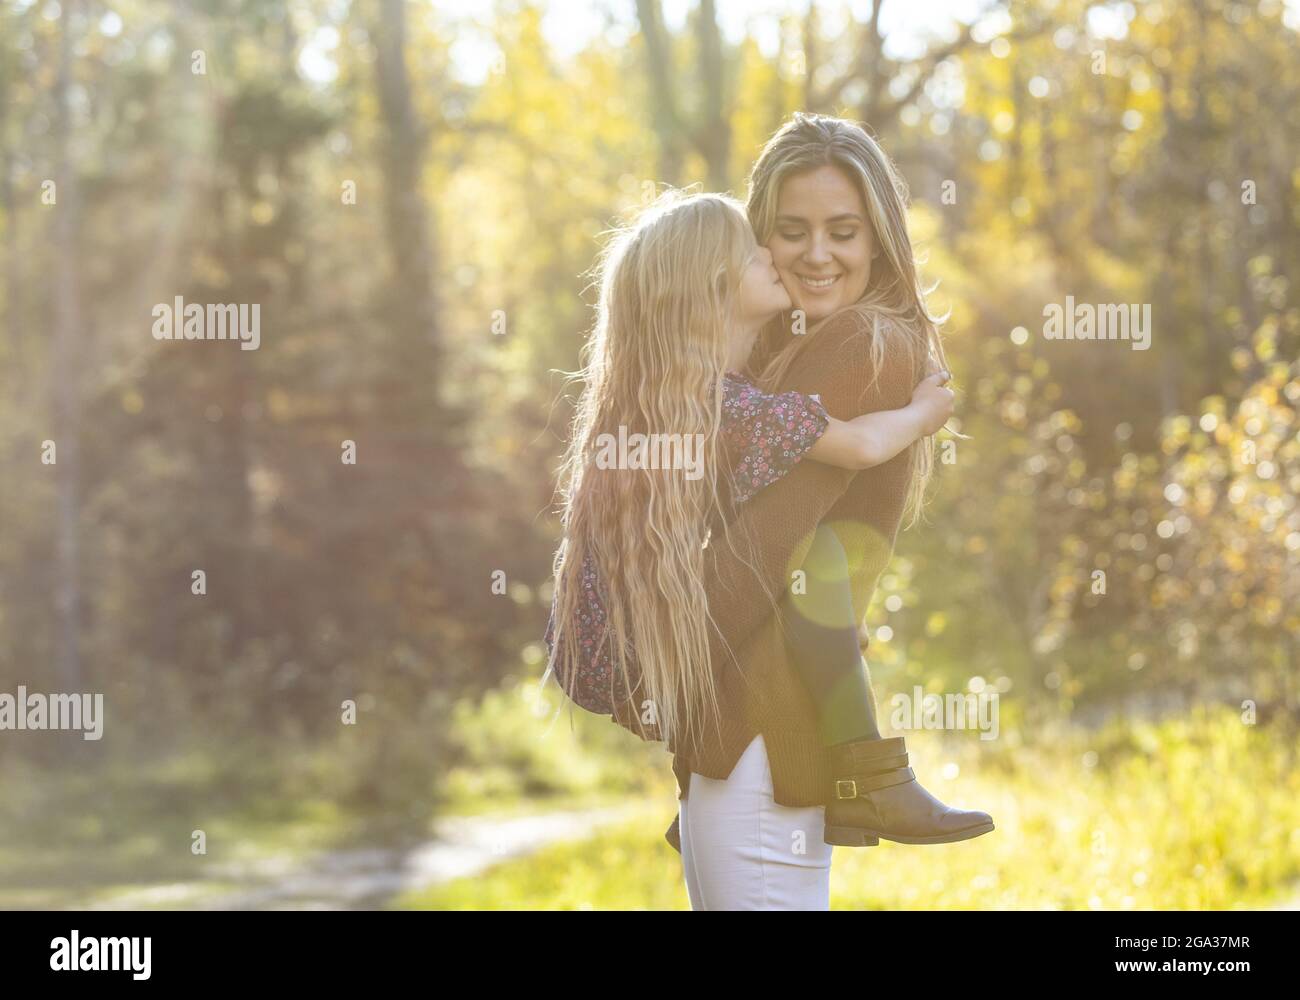 A mother spending quality time with her young daughter, outdoors in a city park; Edmonton, Alberta, Canada Stock Photo